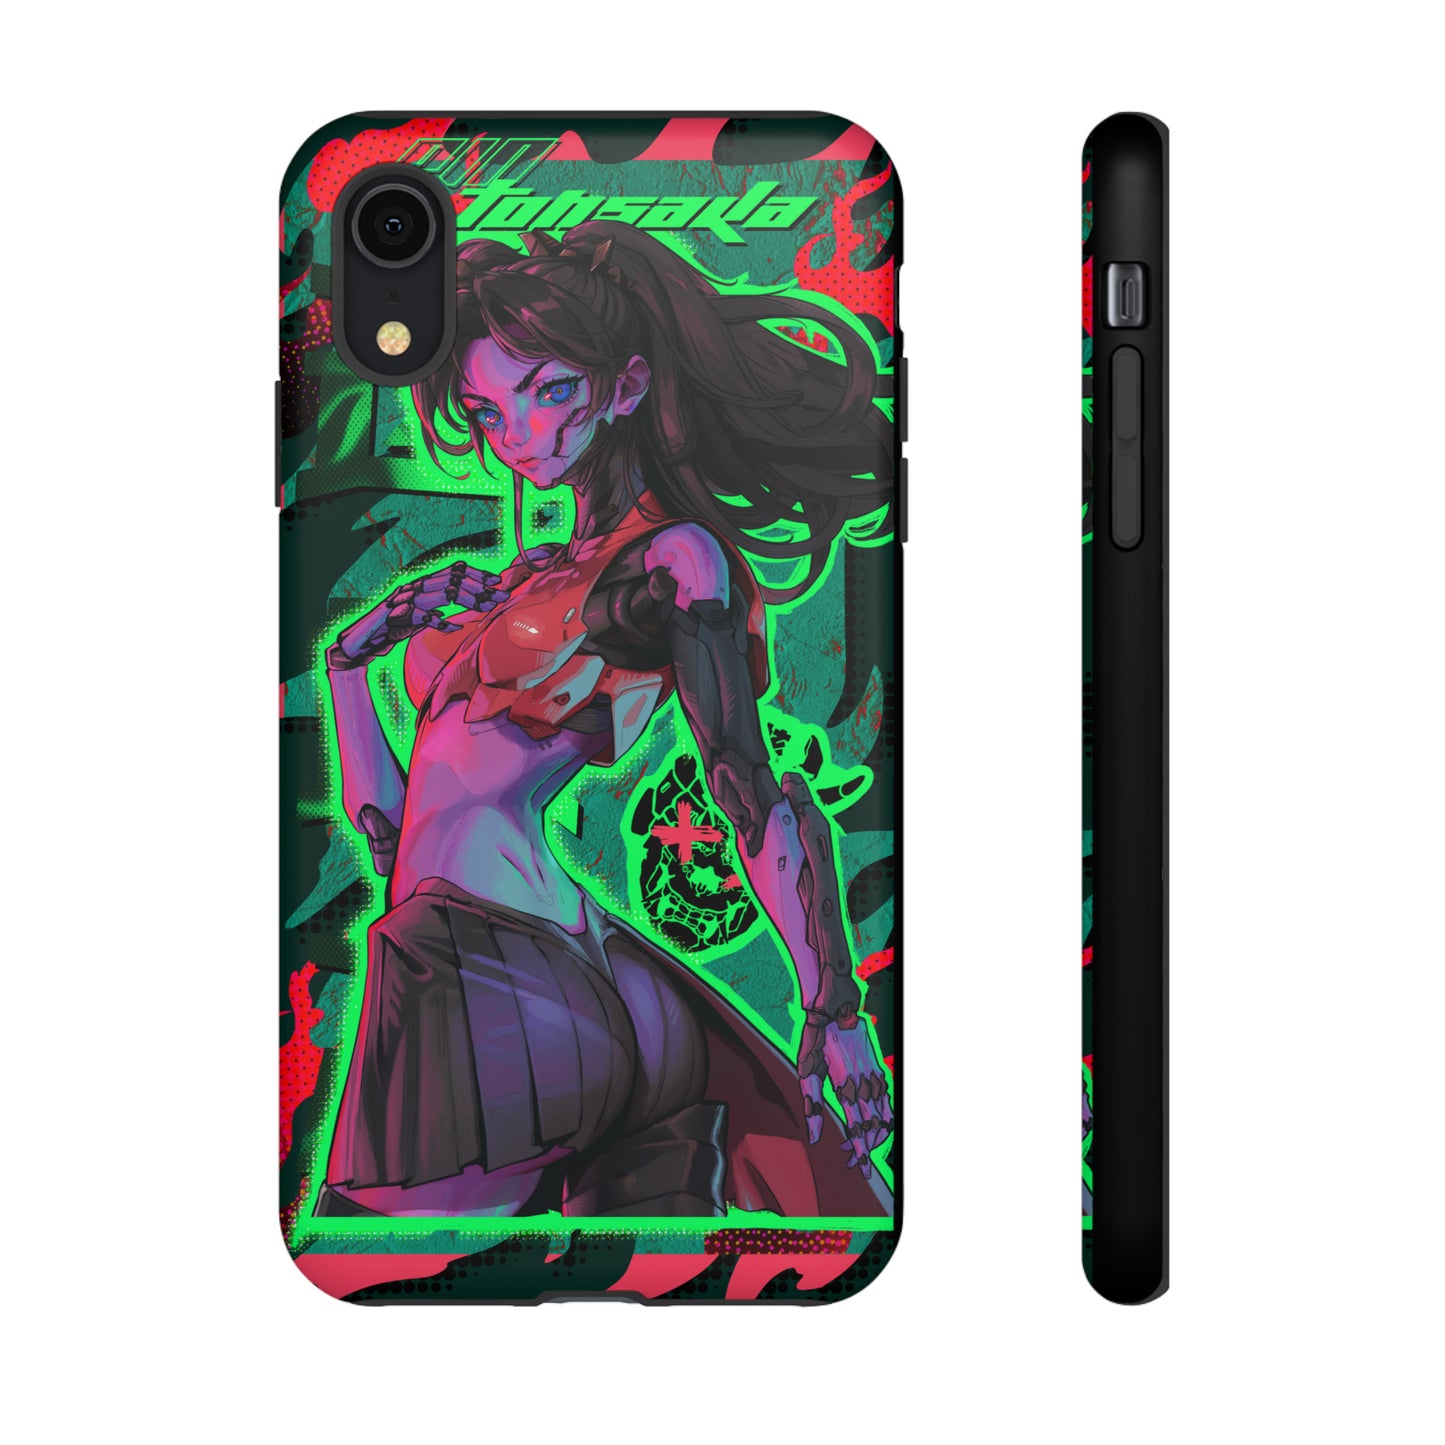 Rin iPhone Cases